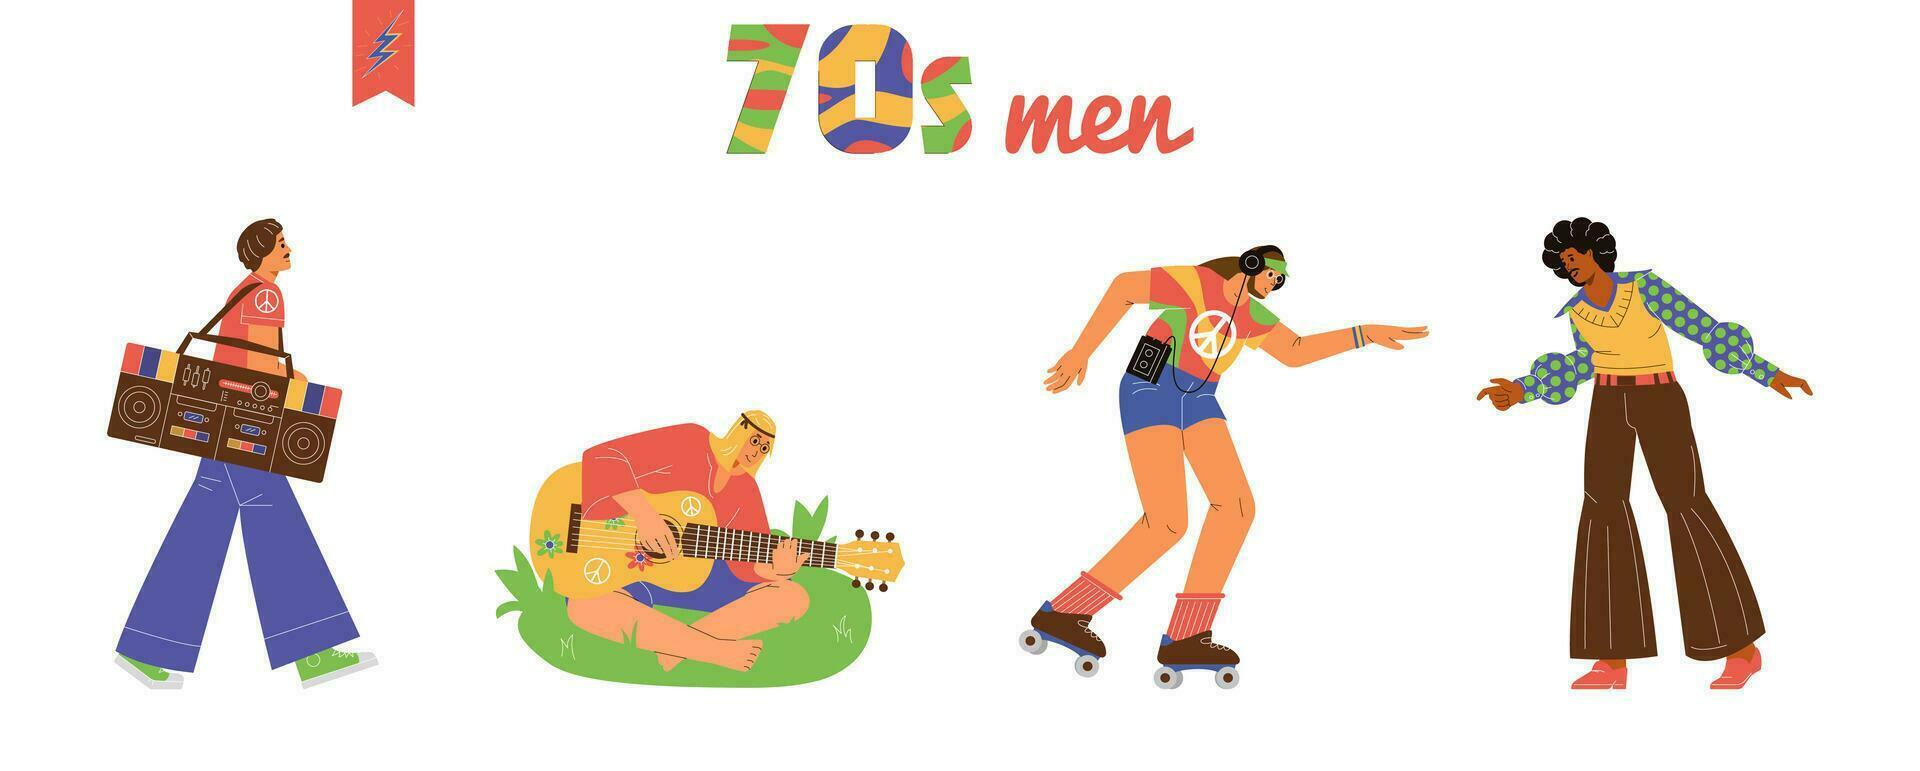 Men from the 70s vector illustrations set.  Men roller skating, dancing disco, hippie playing the guitar, walking with boom box.